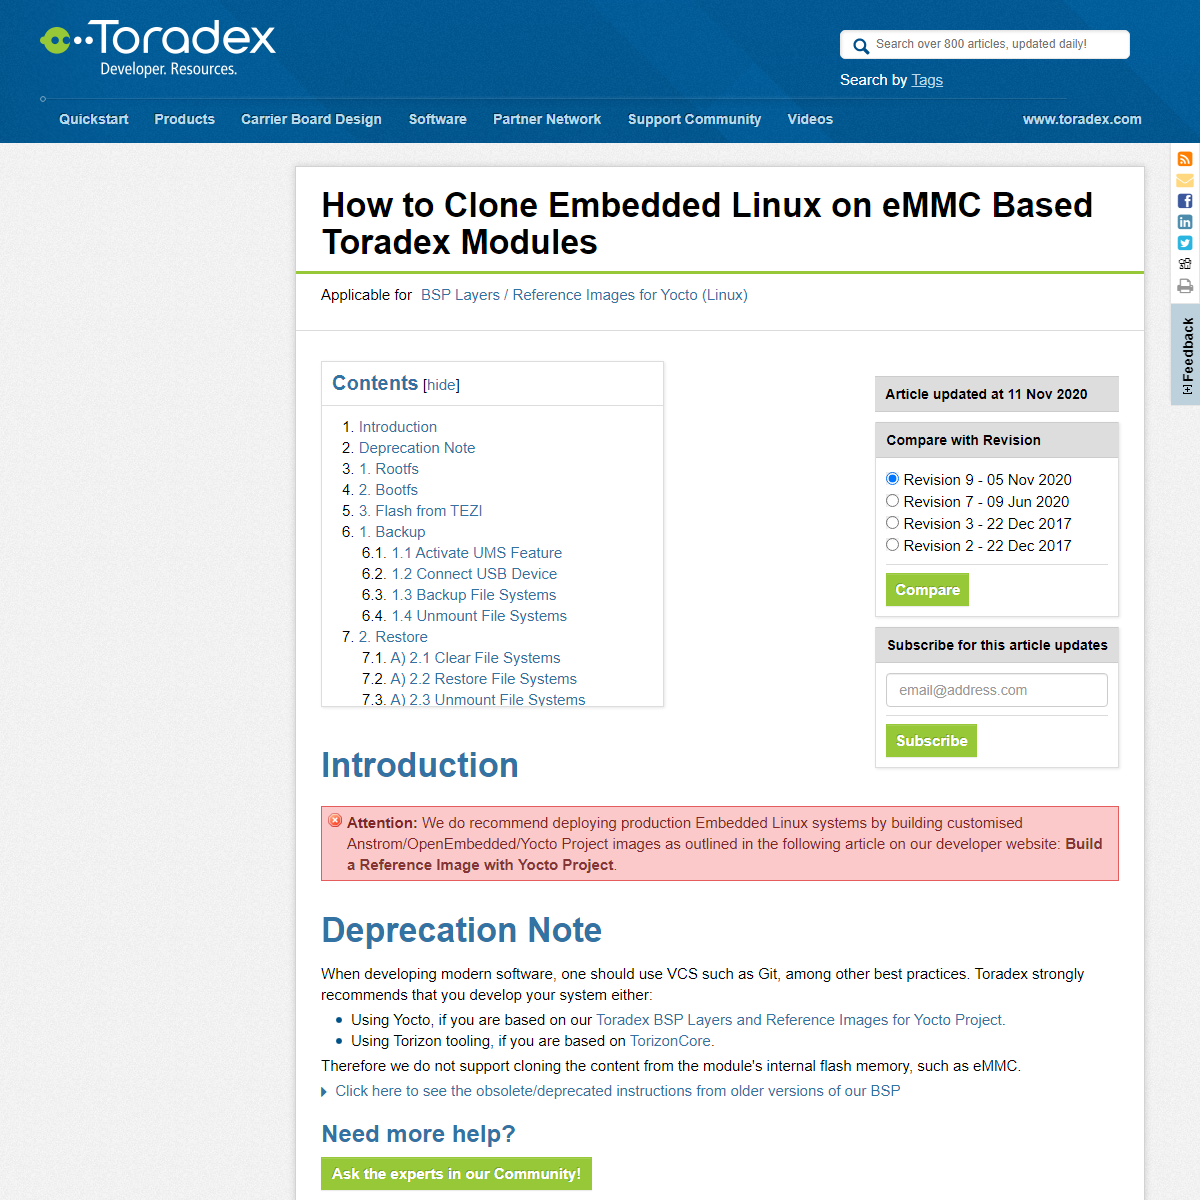 How to Clone Embedded Linux on eMMC Based Toradex Modules